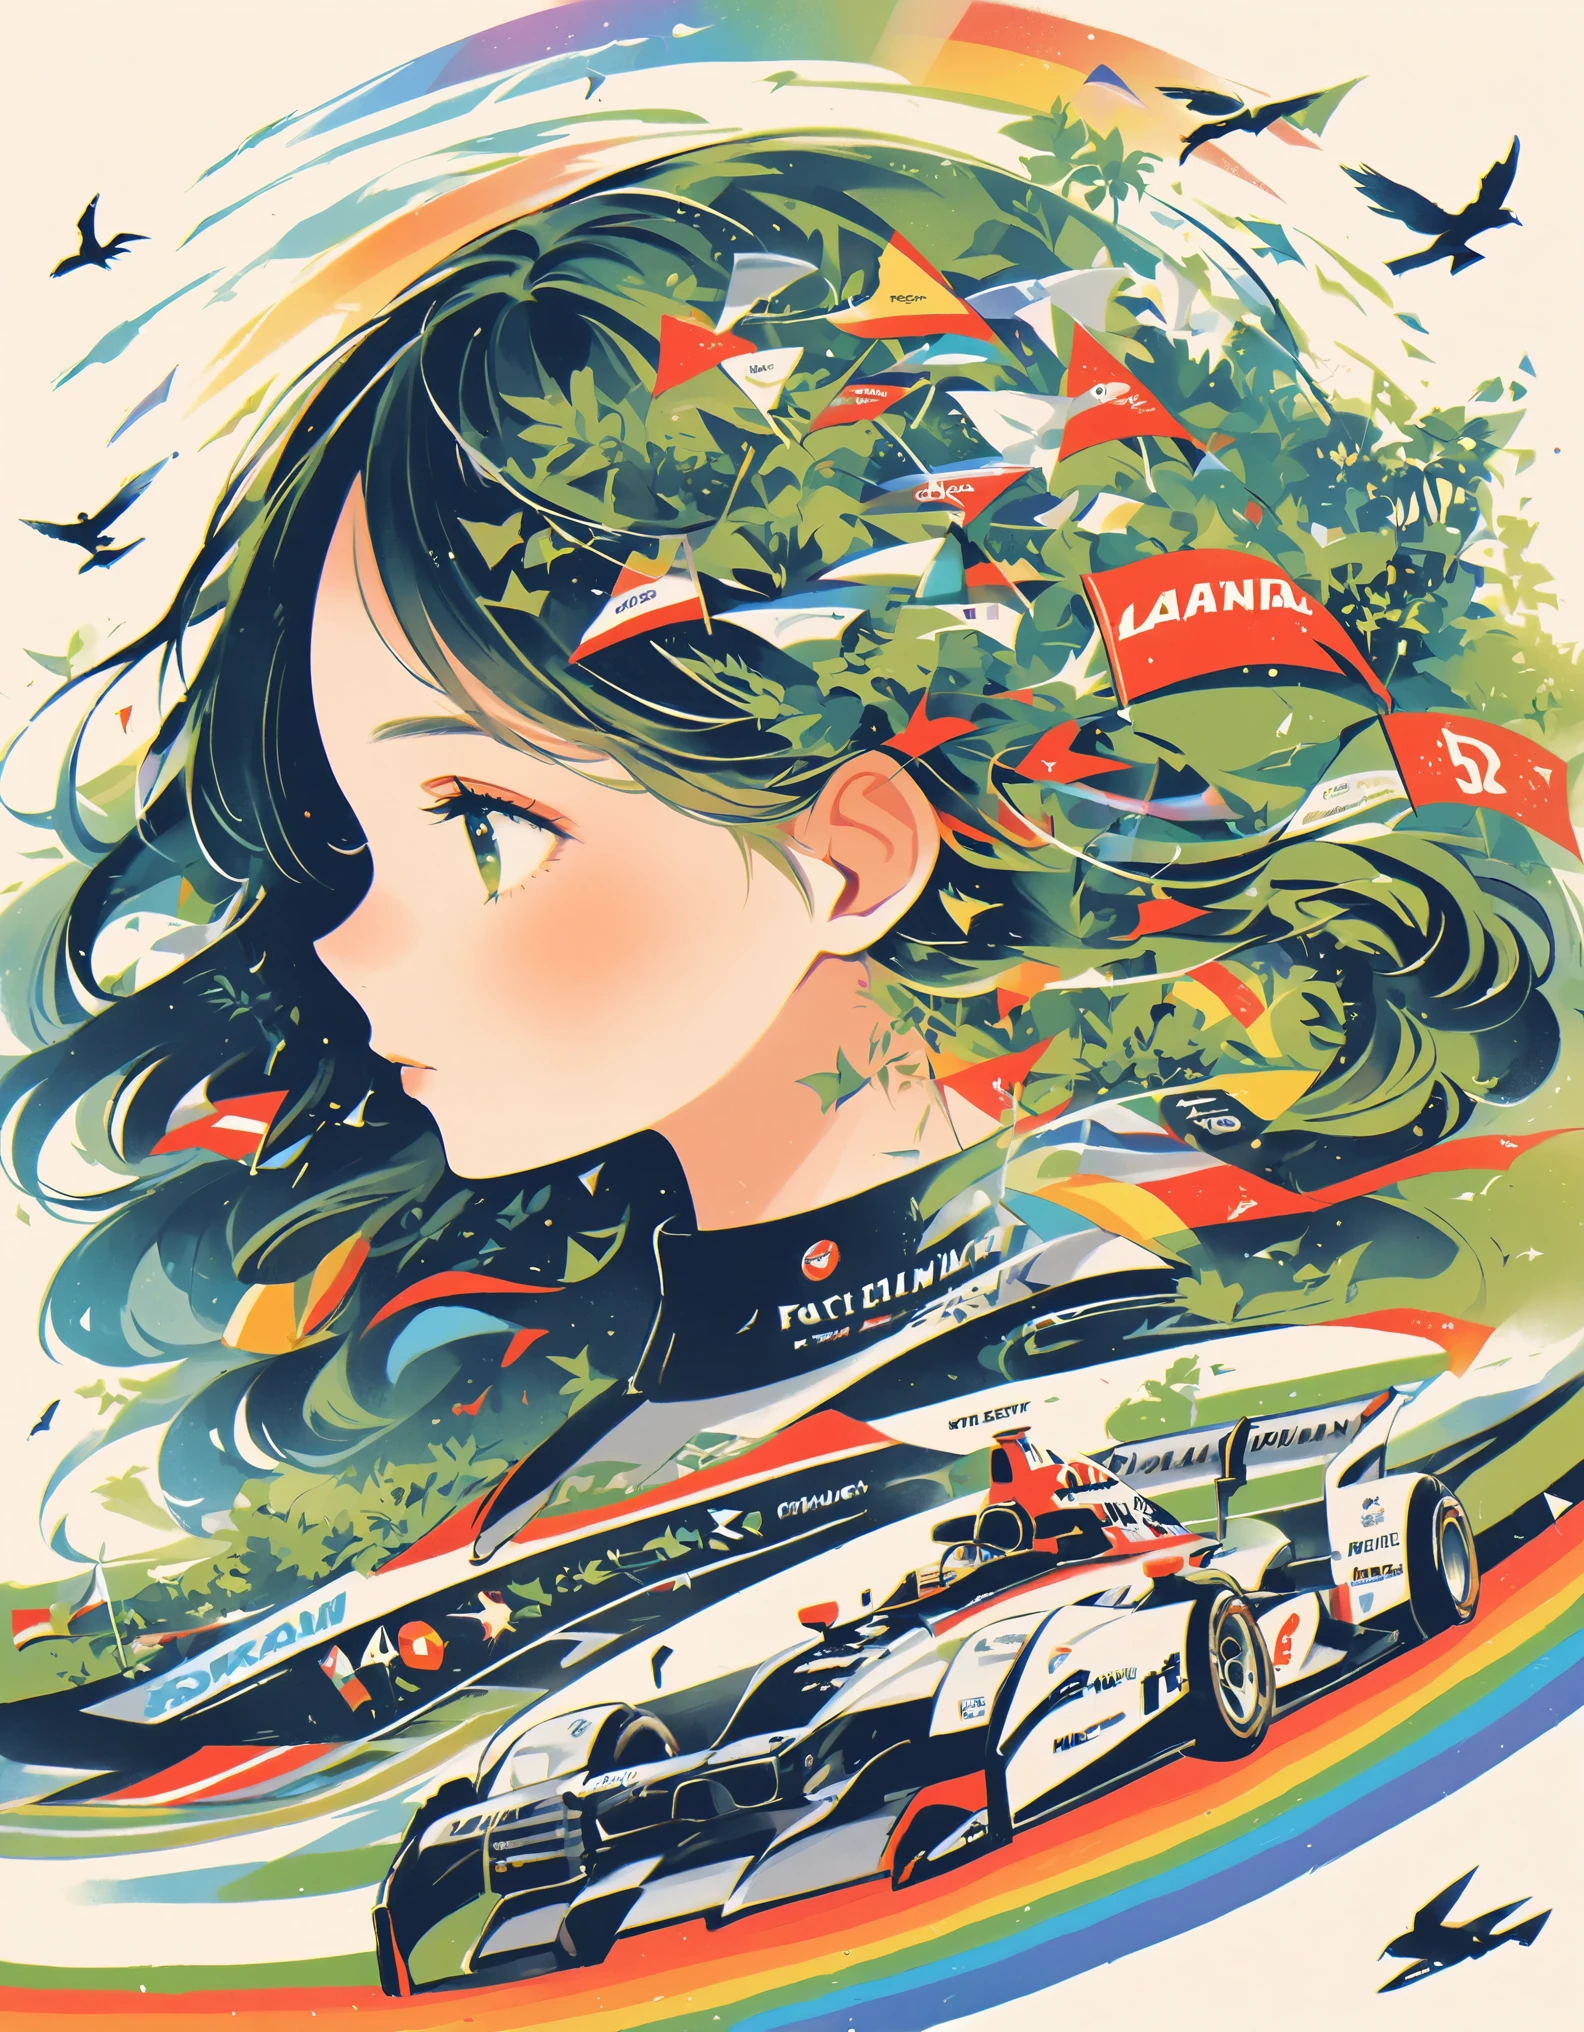 (Long shot: 1.8), (Masterpiece, Best Quality: 1.2), (Planar Vector: 1.3), Artistic Concept Illustration, Minimalism, Maximalist Style, (F1 Racing), (Racing), A girl's head decorated with many colorful F1 racing cars and trophies, flags, and hair adorned with racing and track elements, decorated with various patterns and fonts (neck fused with scattered racing tracks), (Sports Trail), Fantasy Illustration of Rainbow Lane, evoking the charm of crazy racing. The background blends with her hair, the portrait and racing elements are pieced together, used for imaginative illustrations, the concept of dreams,